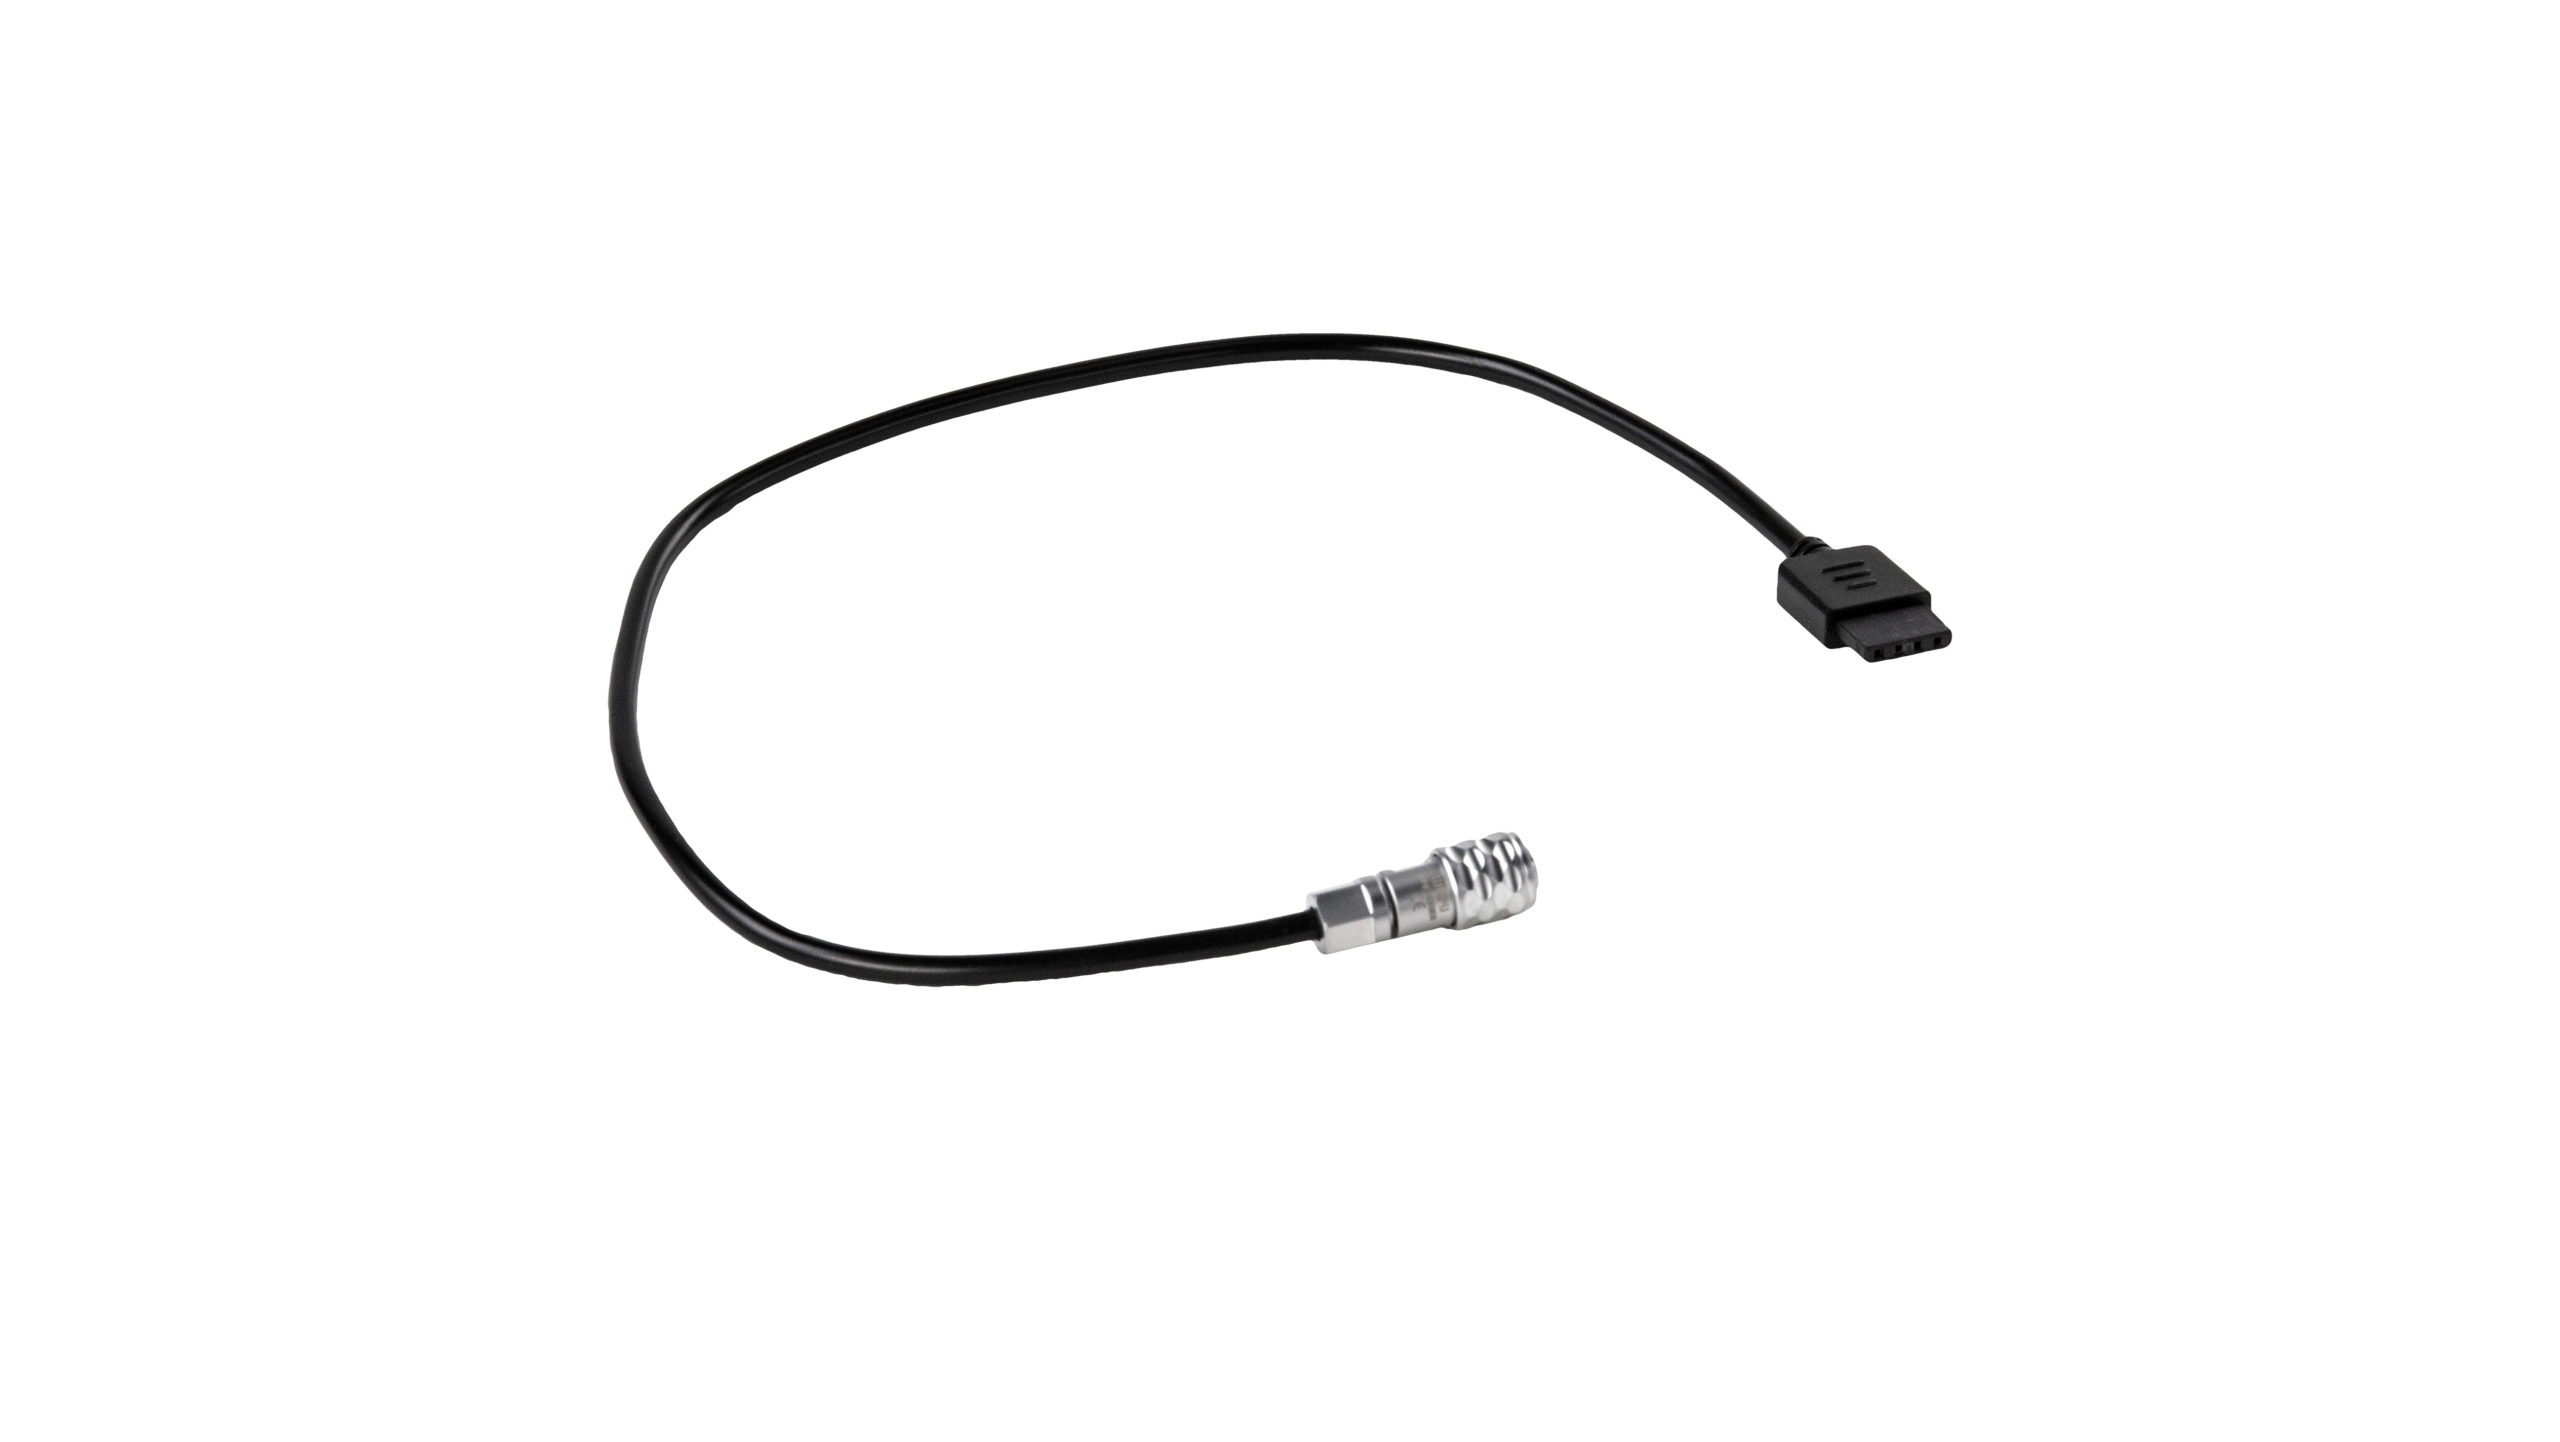 Ronin-S 12V Power Cable for BMPCC 4K/6K